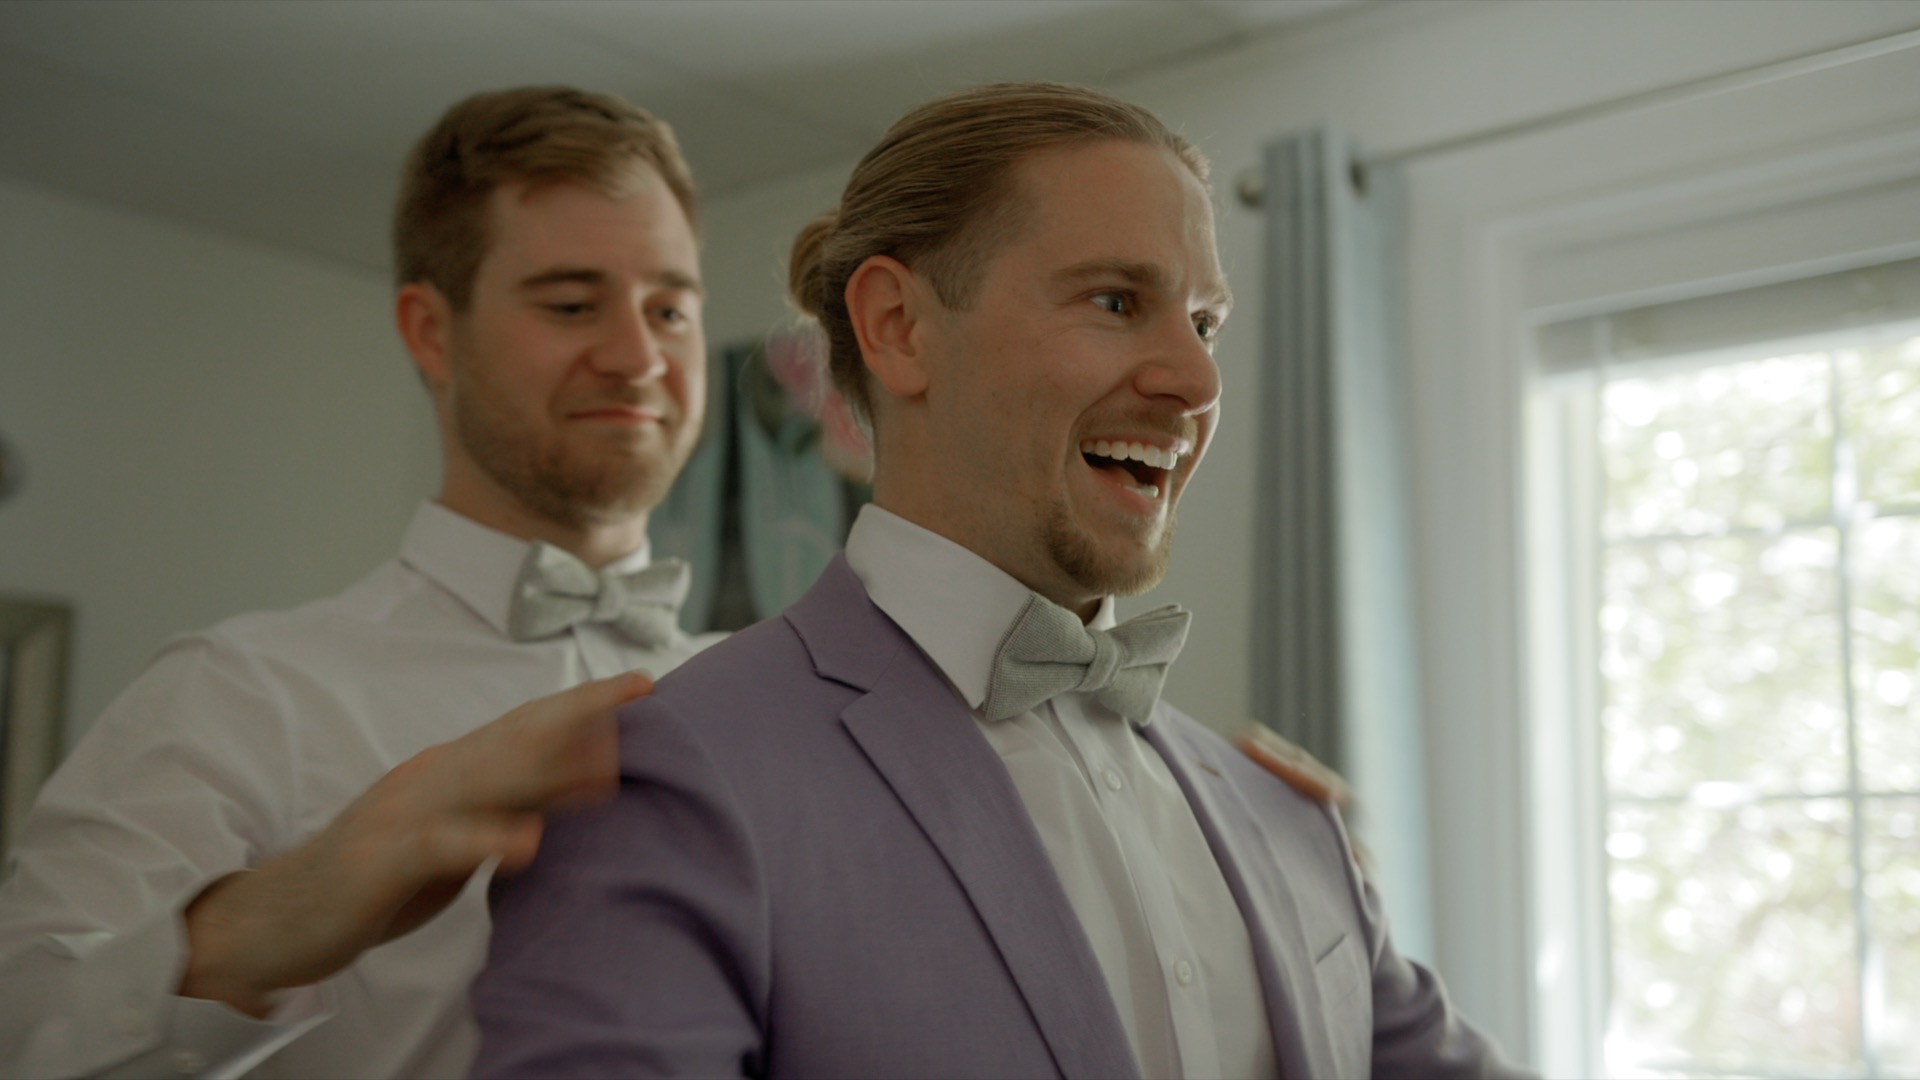 two grooms helping each other get ready at their wedding